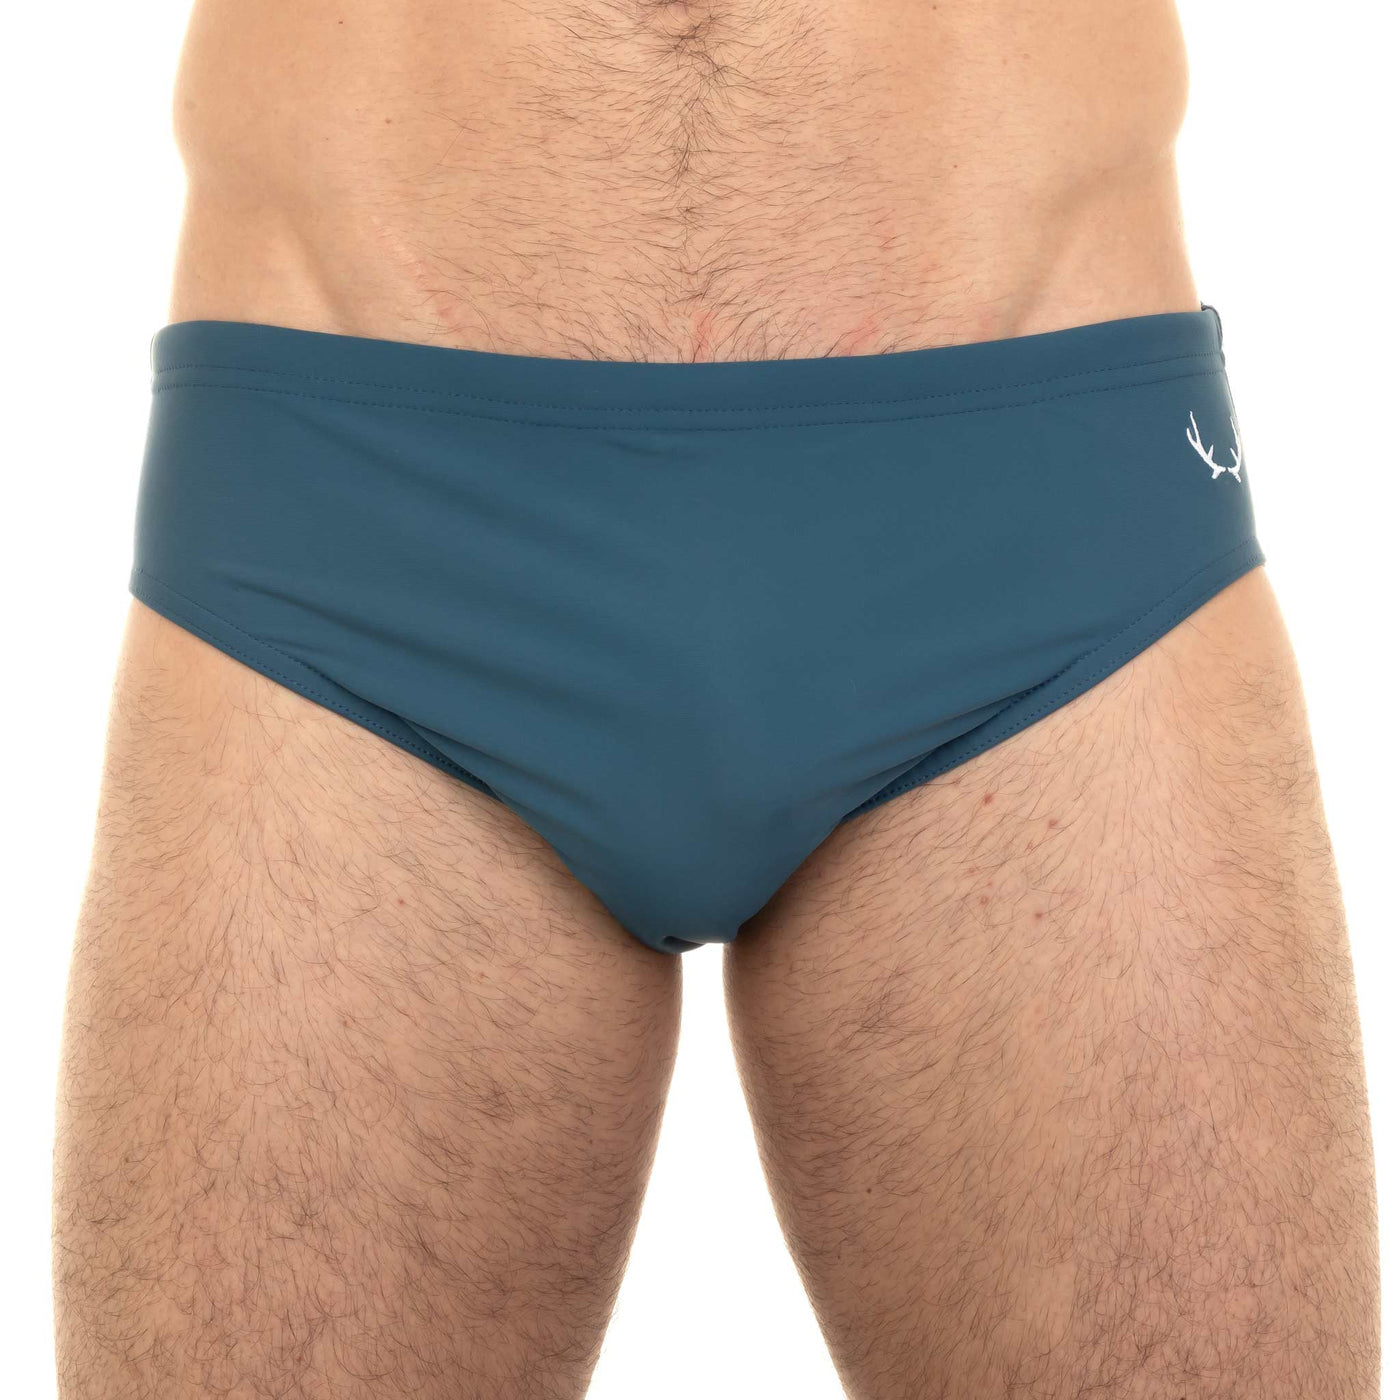 Teal recycled nylon swim brief for men